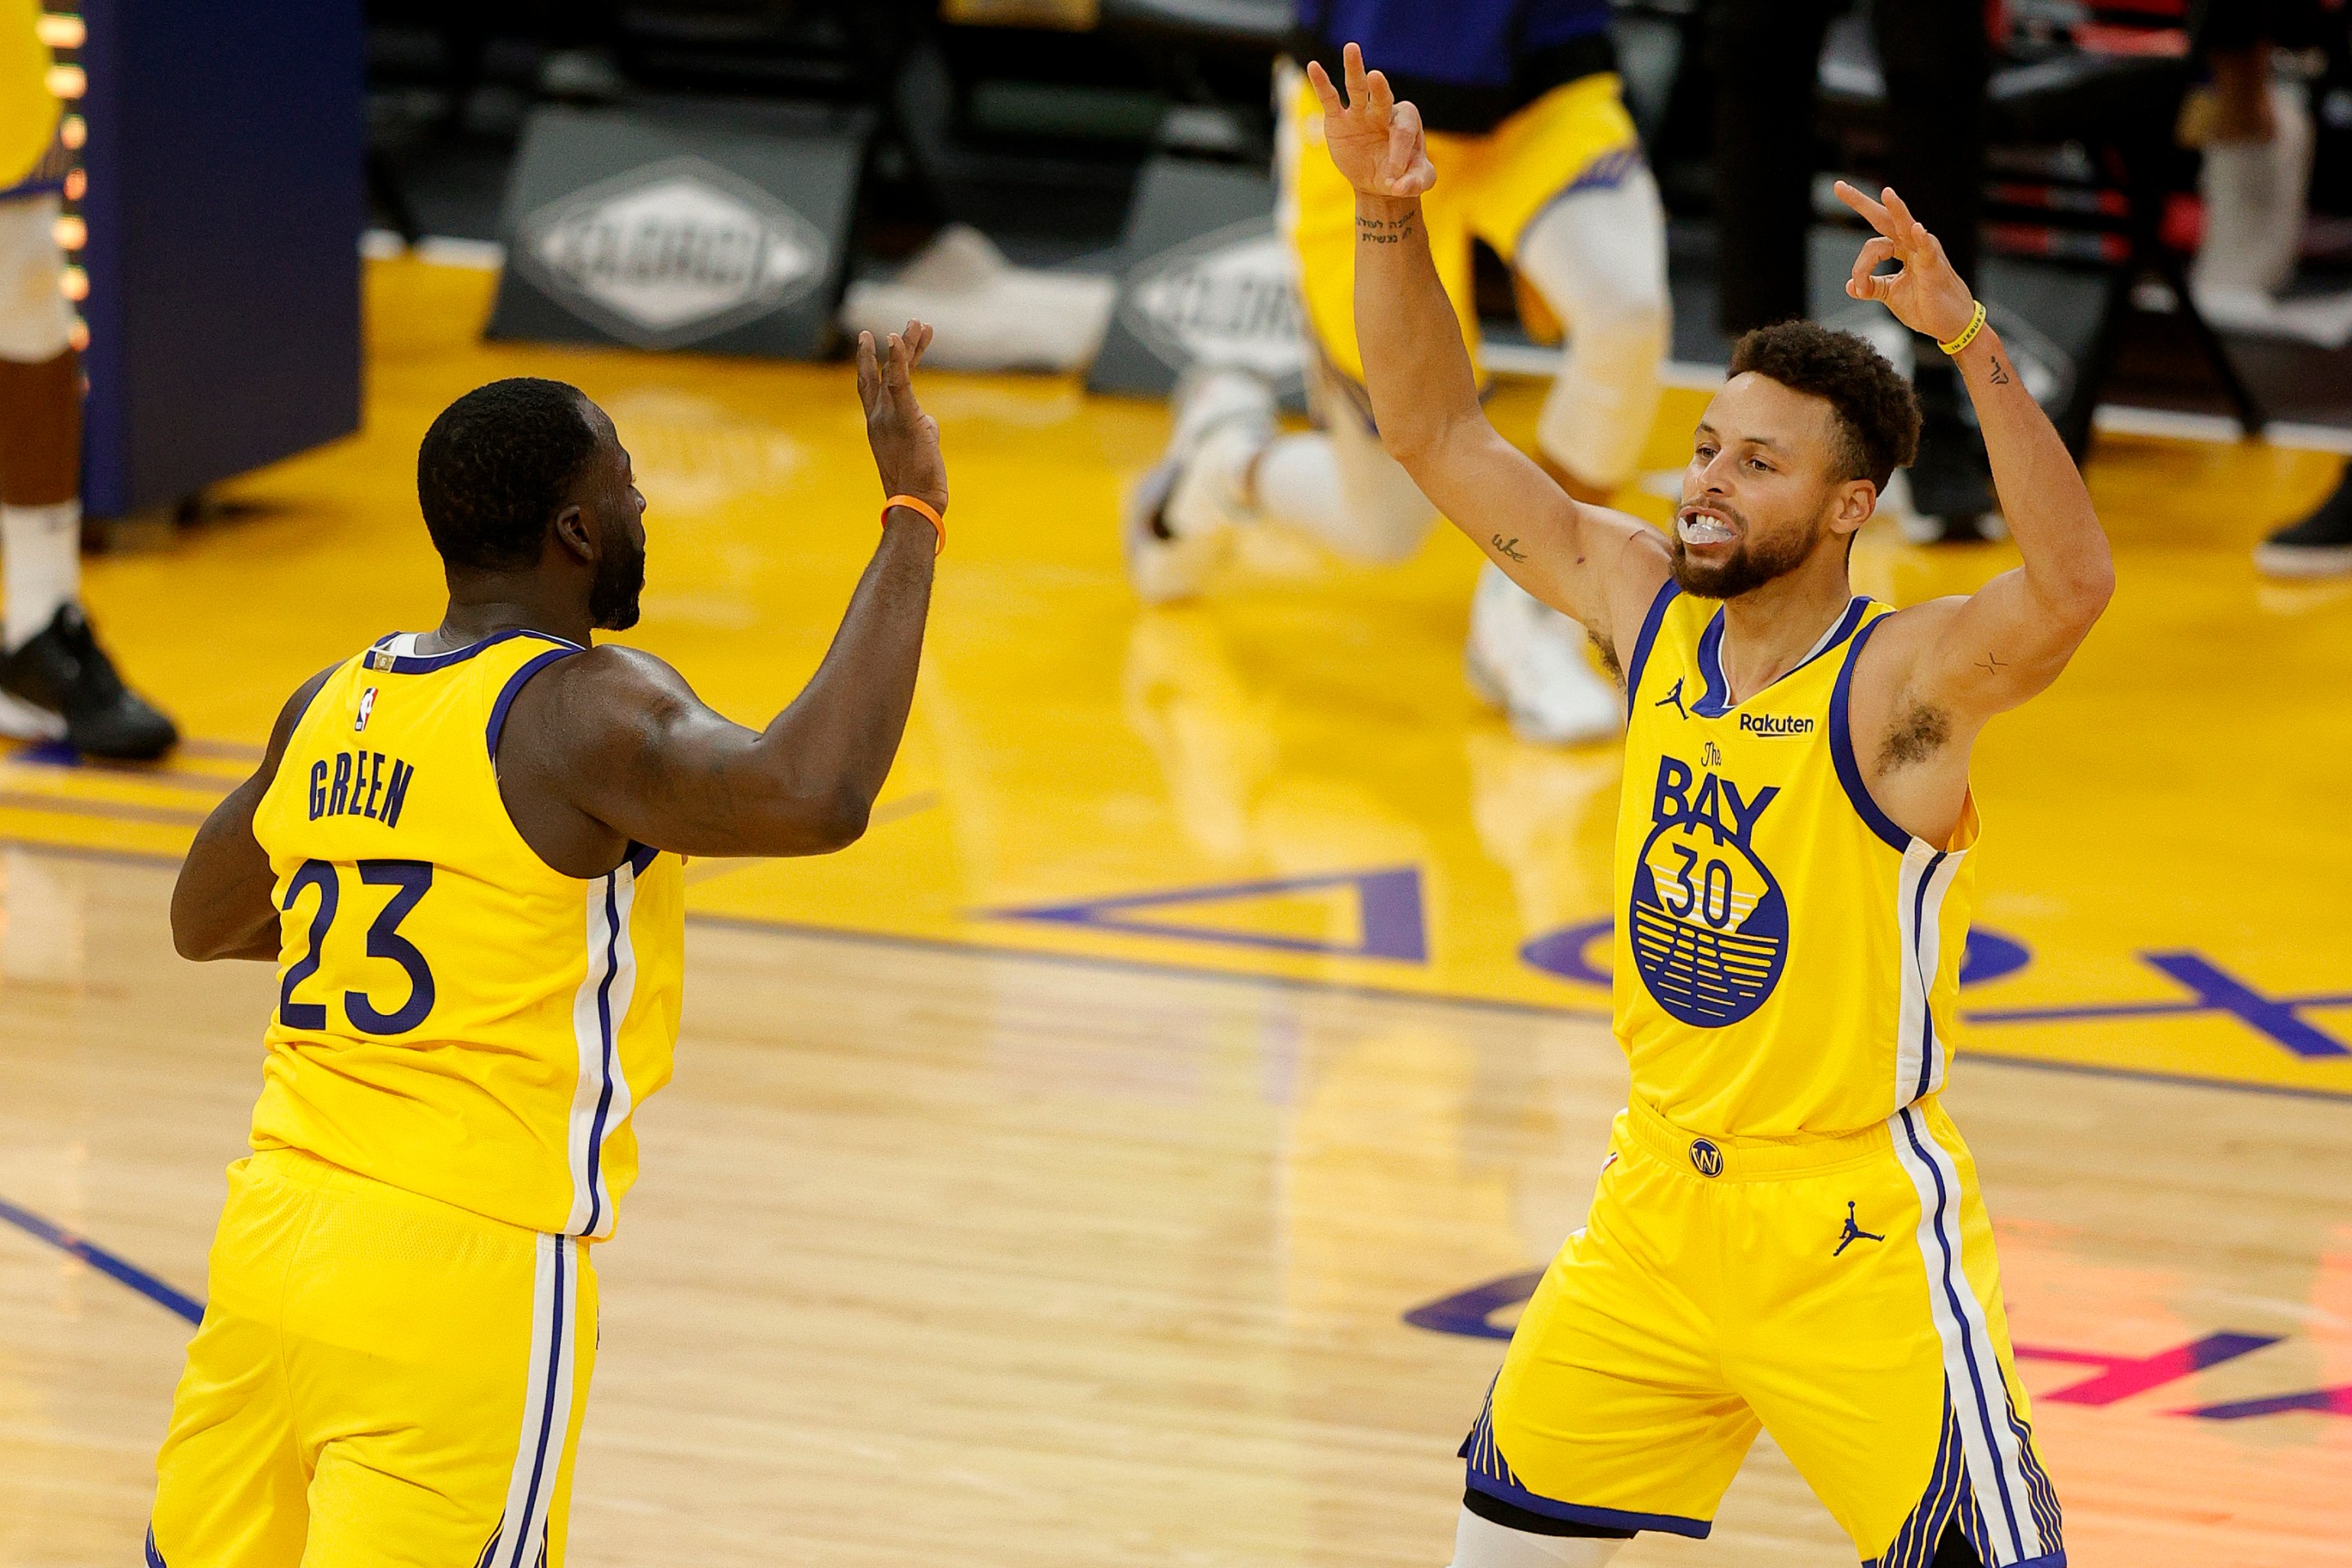 Steph Curry celebrates a make with Draymond Green.